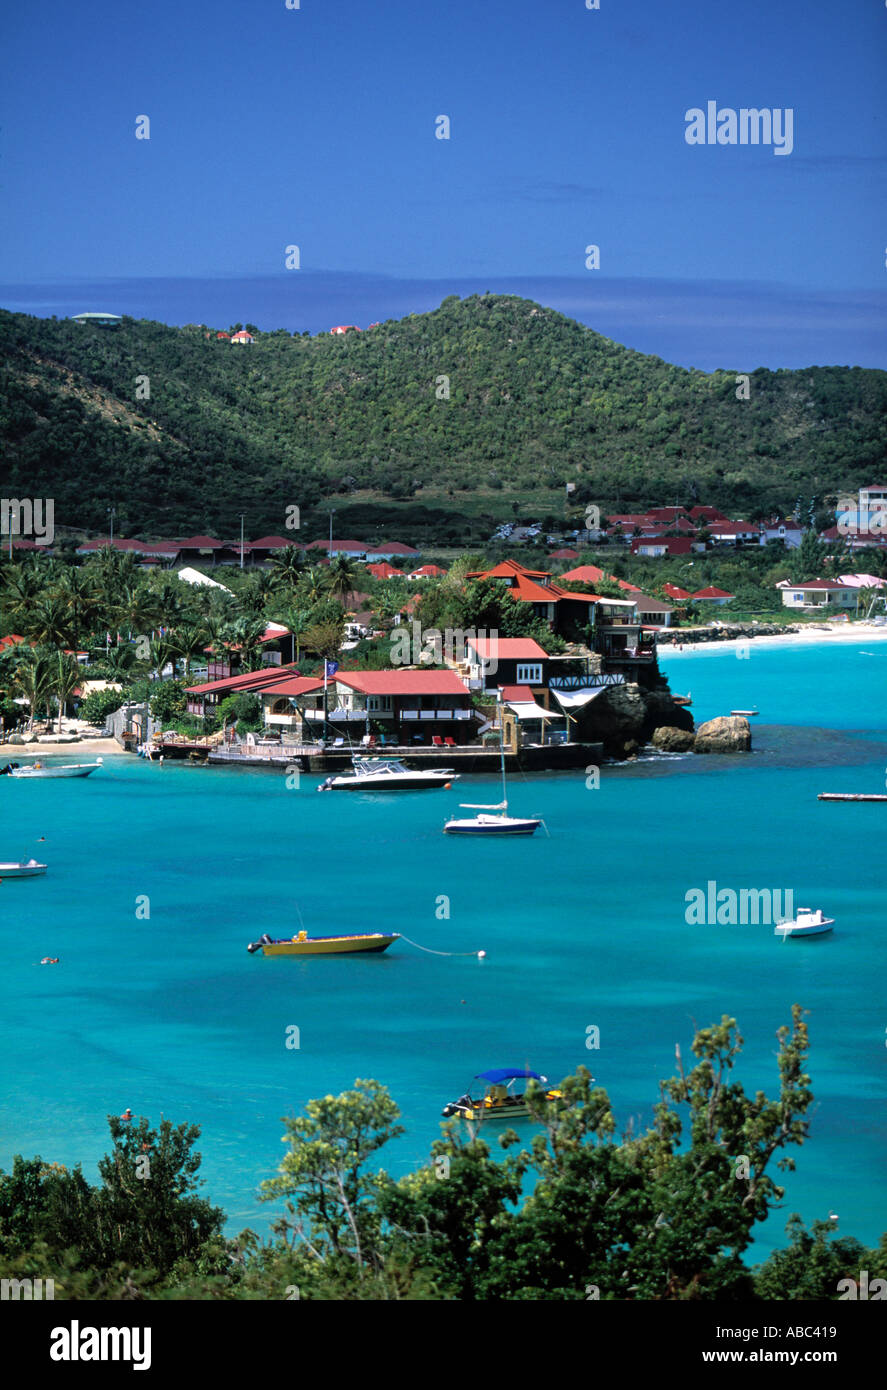 Eden Roc Hotel, St. Jean, St. Barts, French West Indes Stock Photo